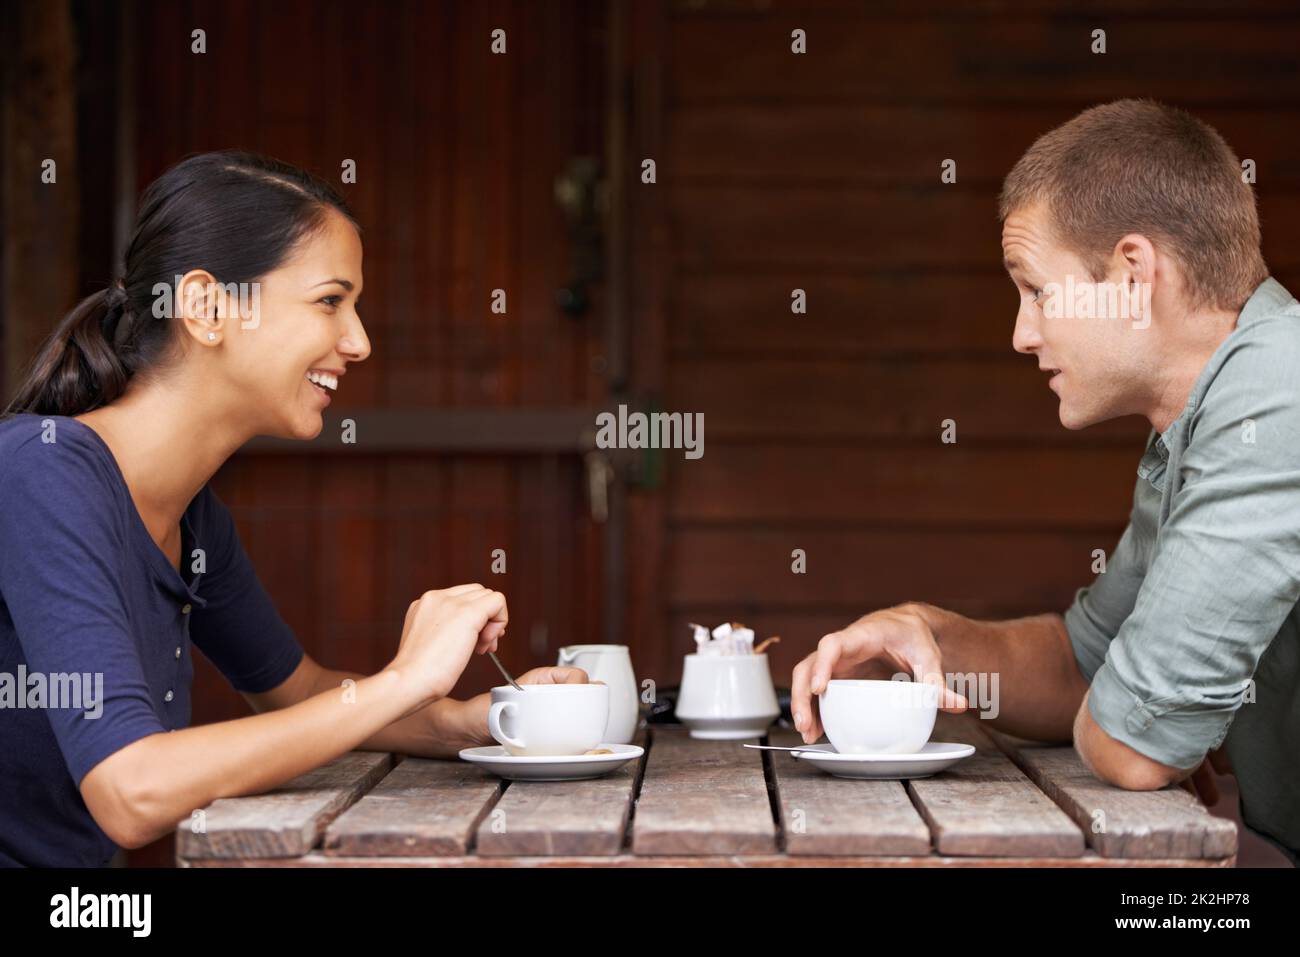 Is it cool if I hold your hand. Two young adults chatting over a cup of coffee. Stock Photo